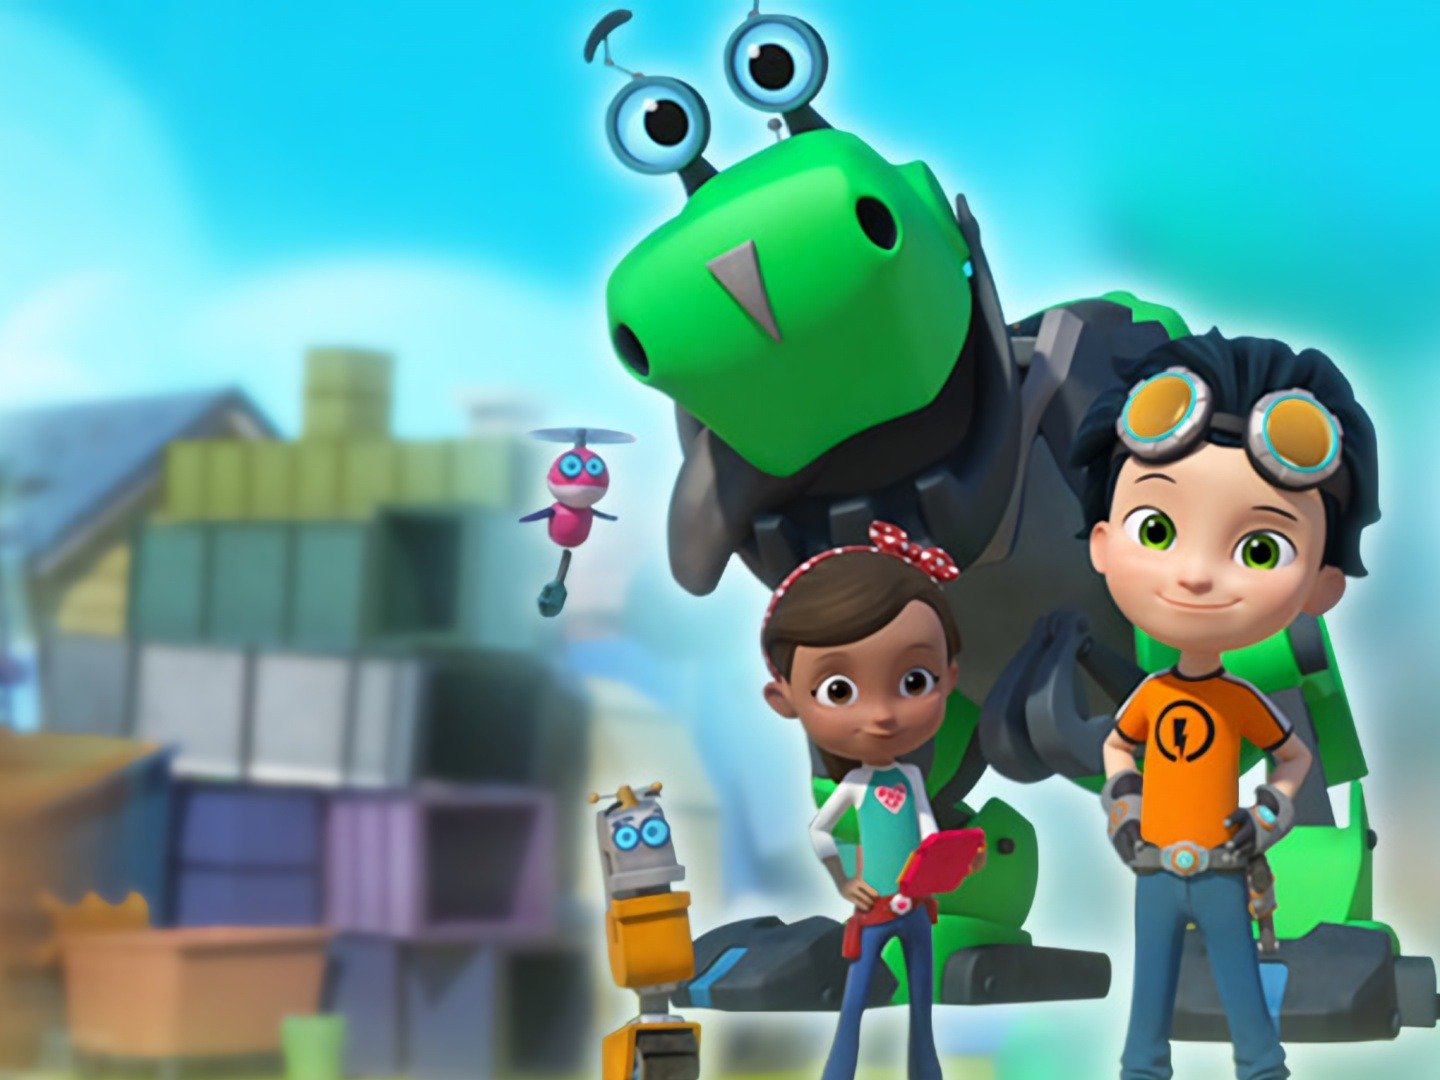 Rusty Rivets on TV | Season 3 Episode 26 | Channels and schedules ...